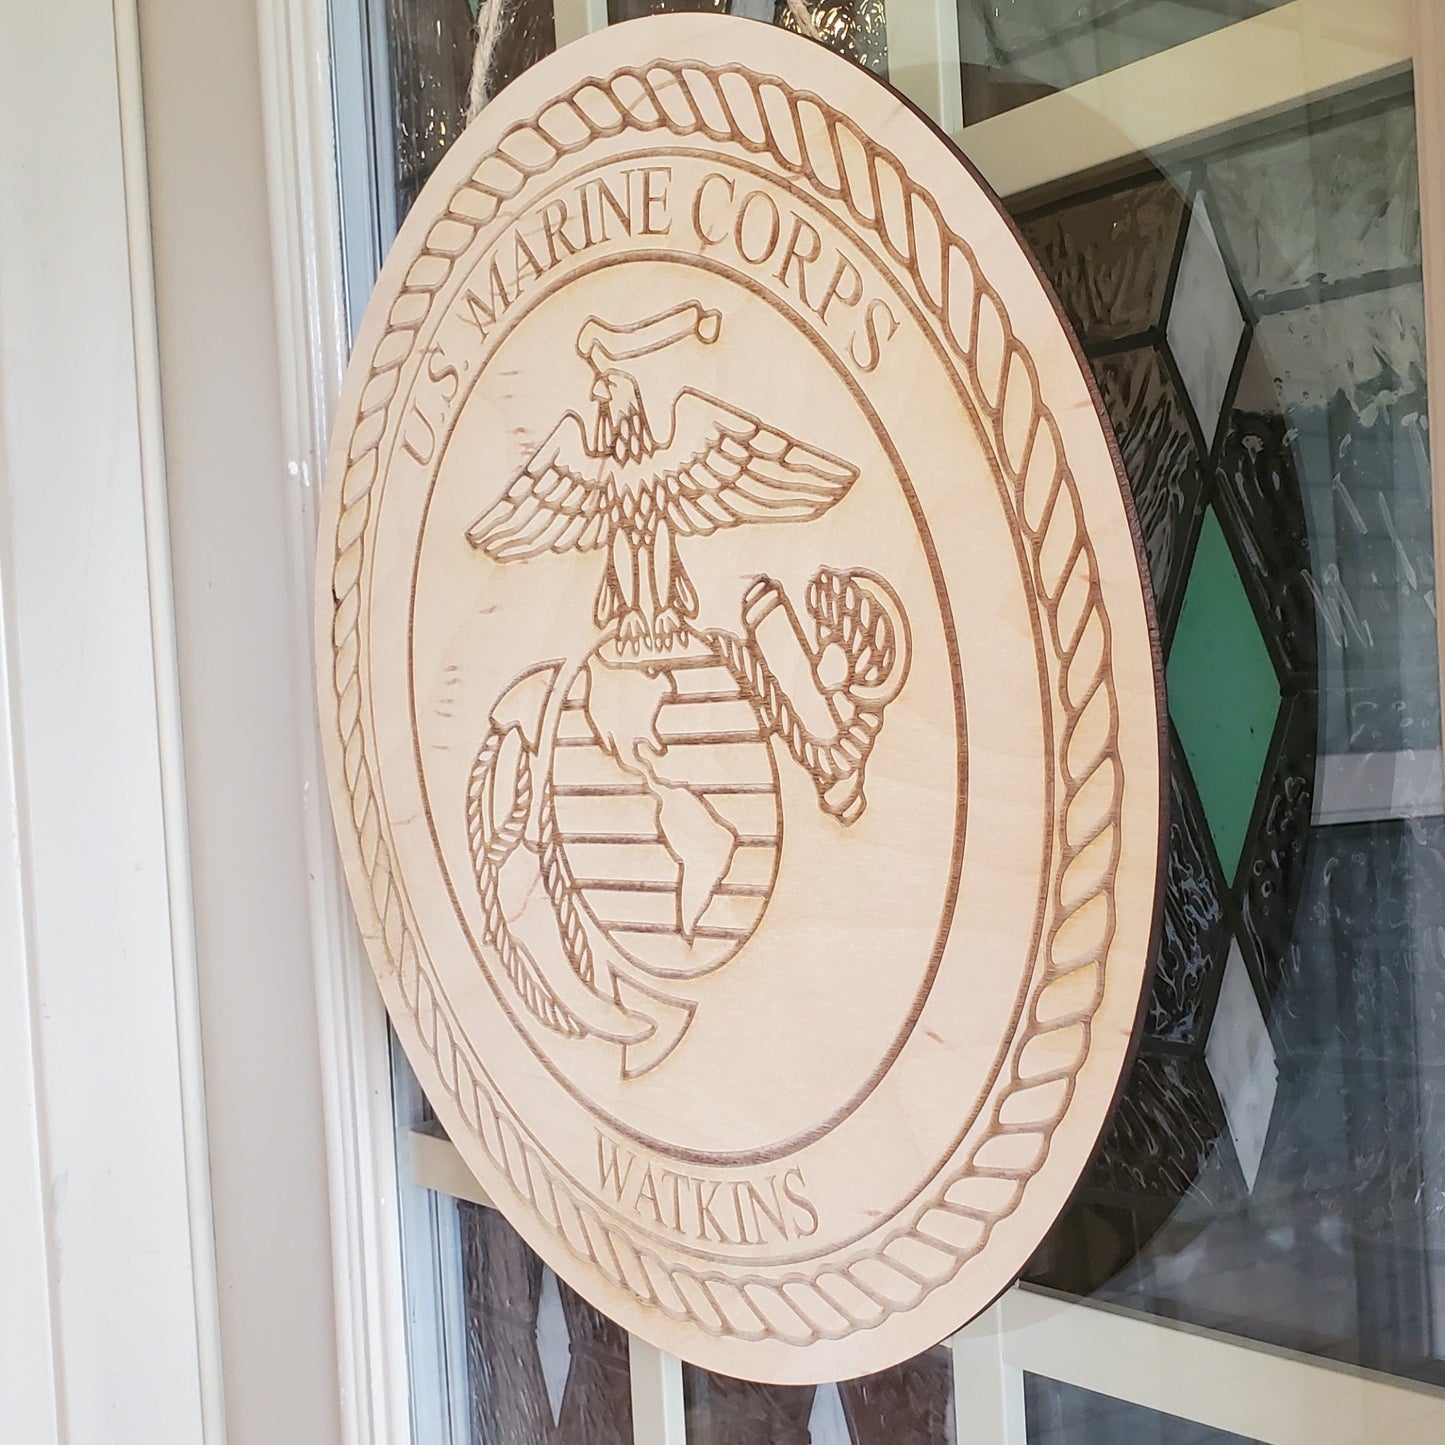 Wooden laser marine corps sign